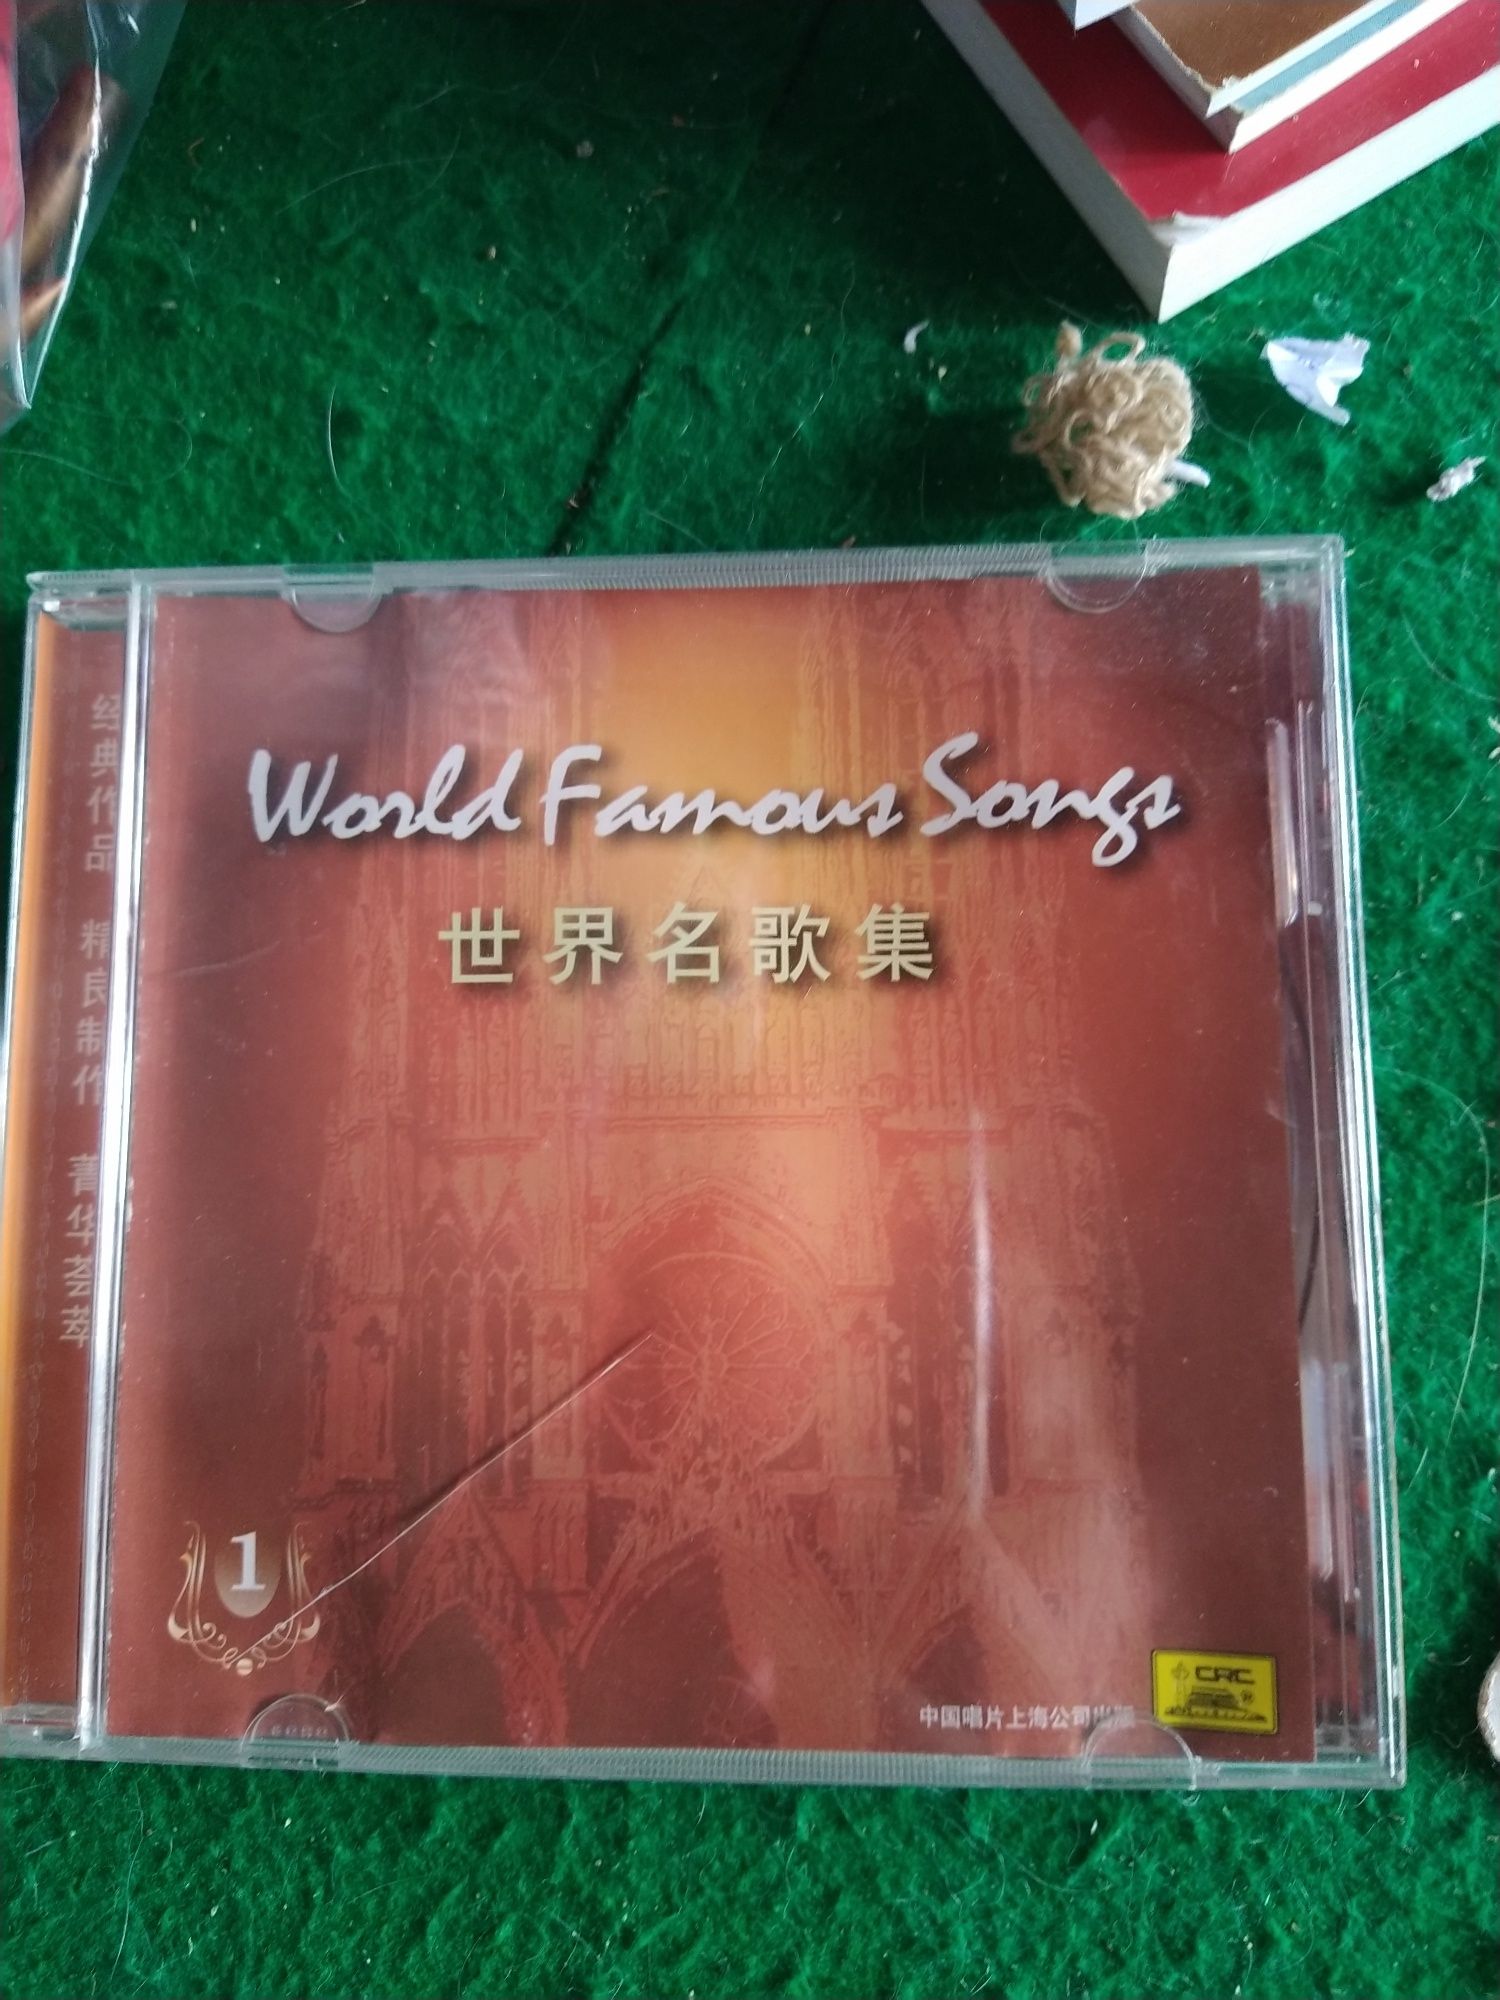 World famous songs